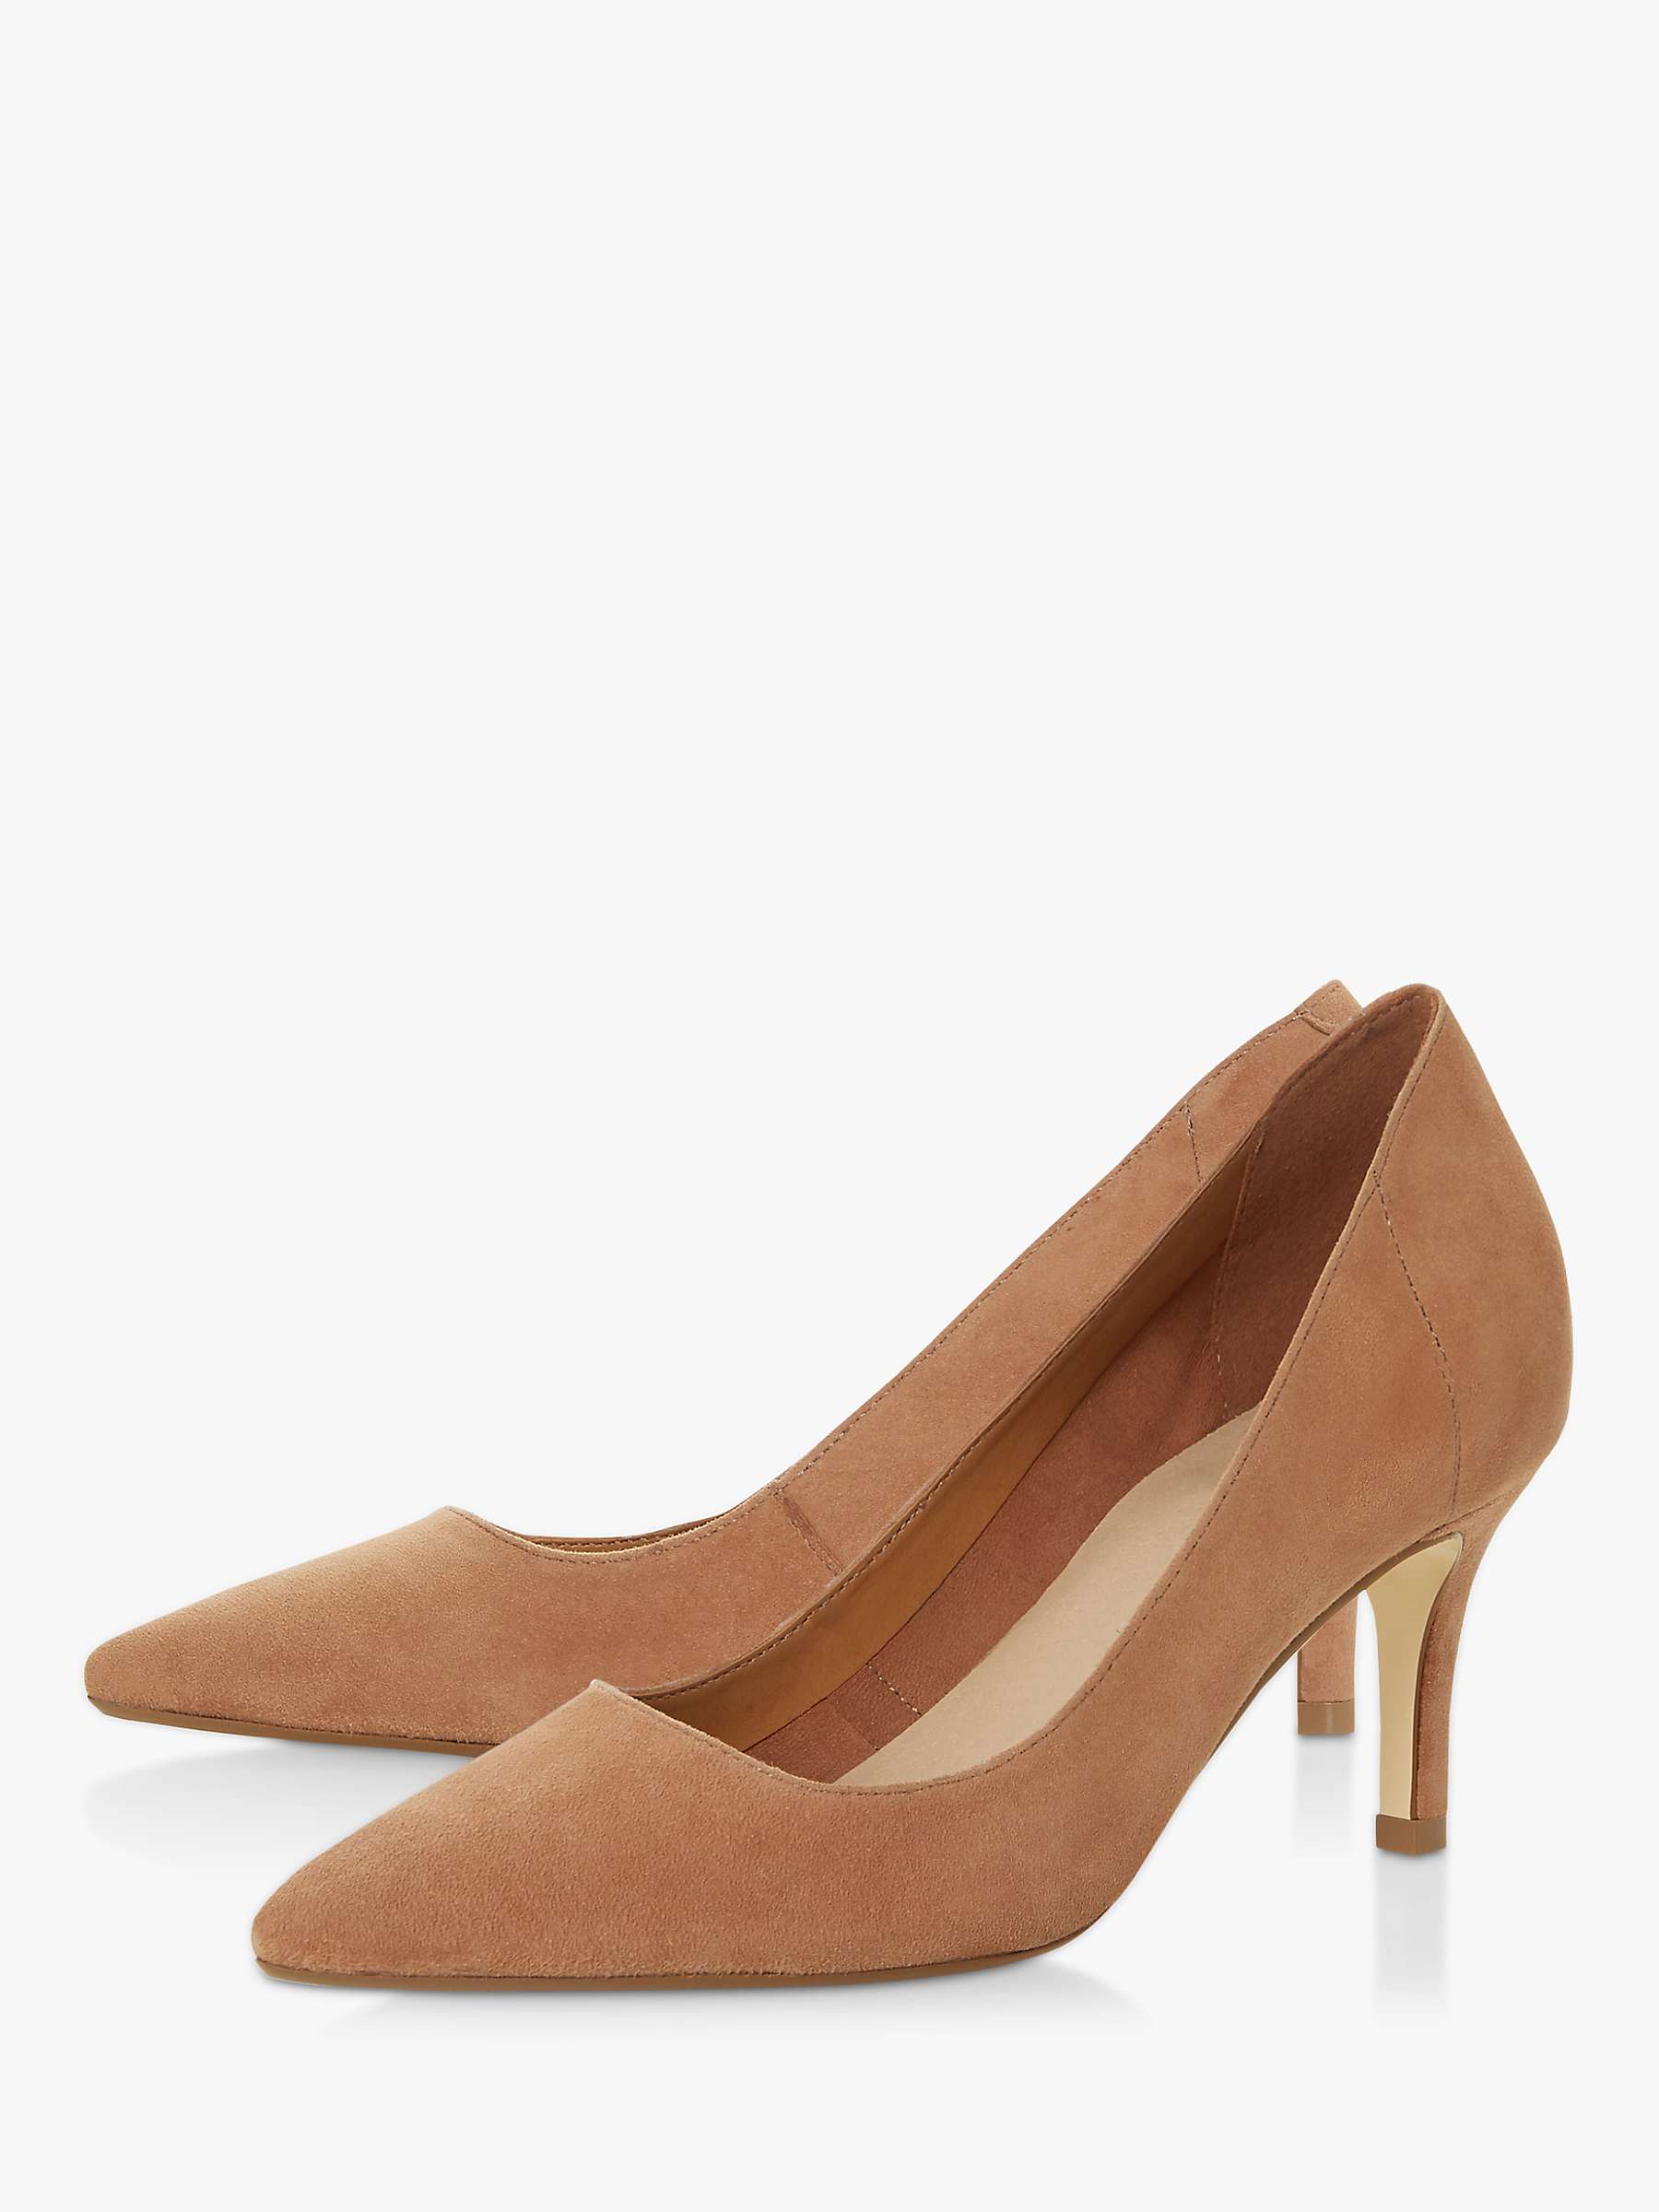 Buy Dune Andina Suede Court Shoes Online at johnlewis.com